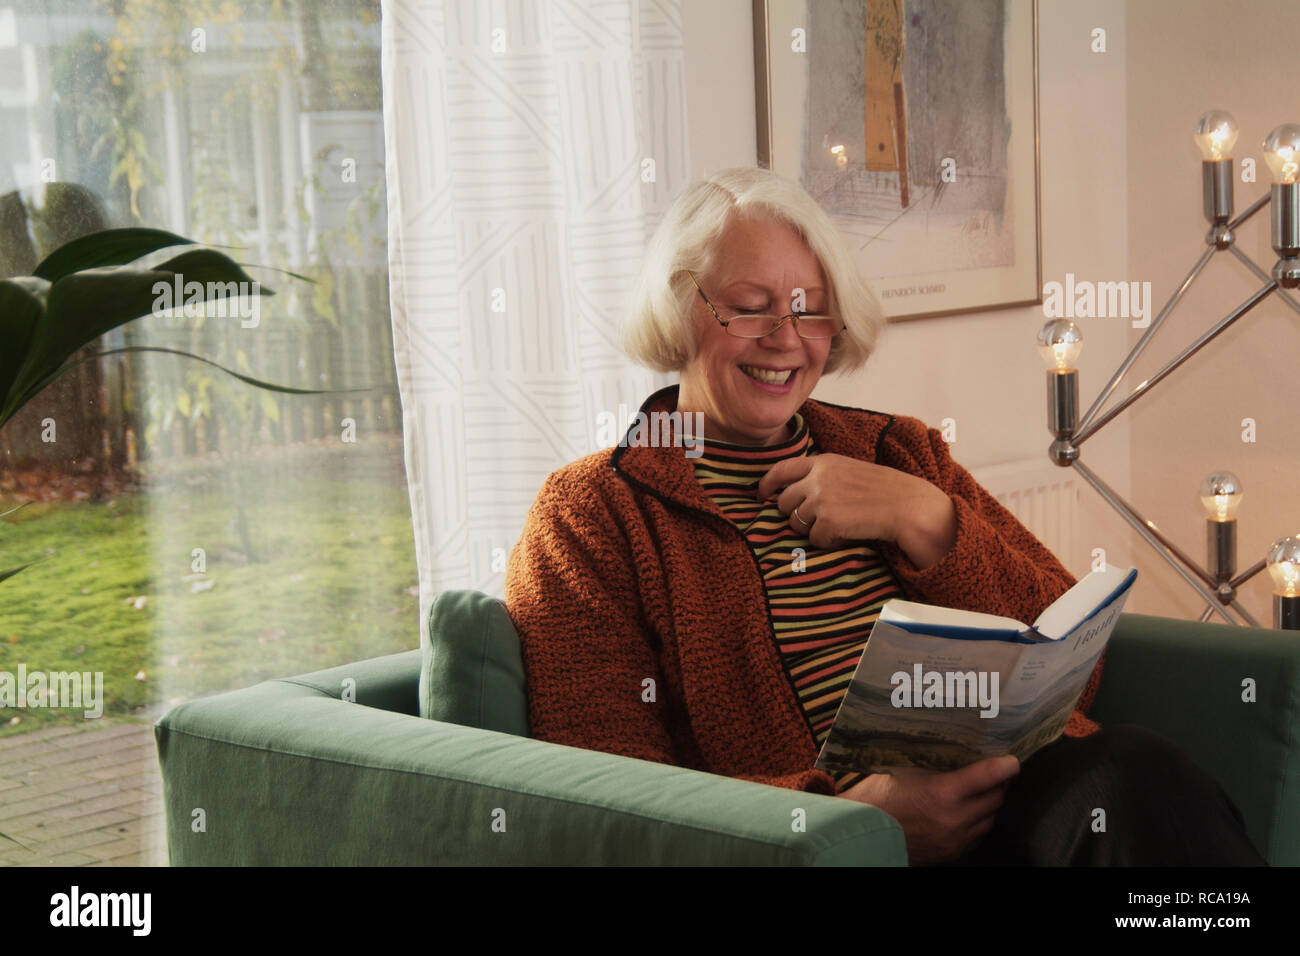 Frau mittleren Alters liest Buch auf einem Sofa | middleaged woman is reading a book on a couch Stock Photo